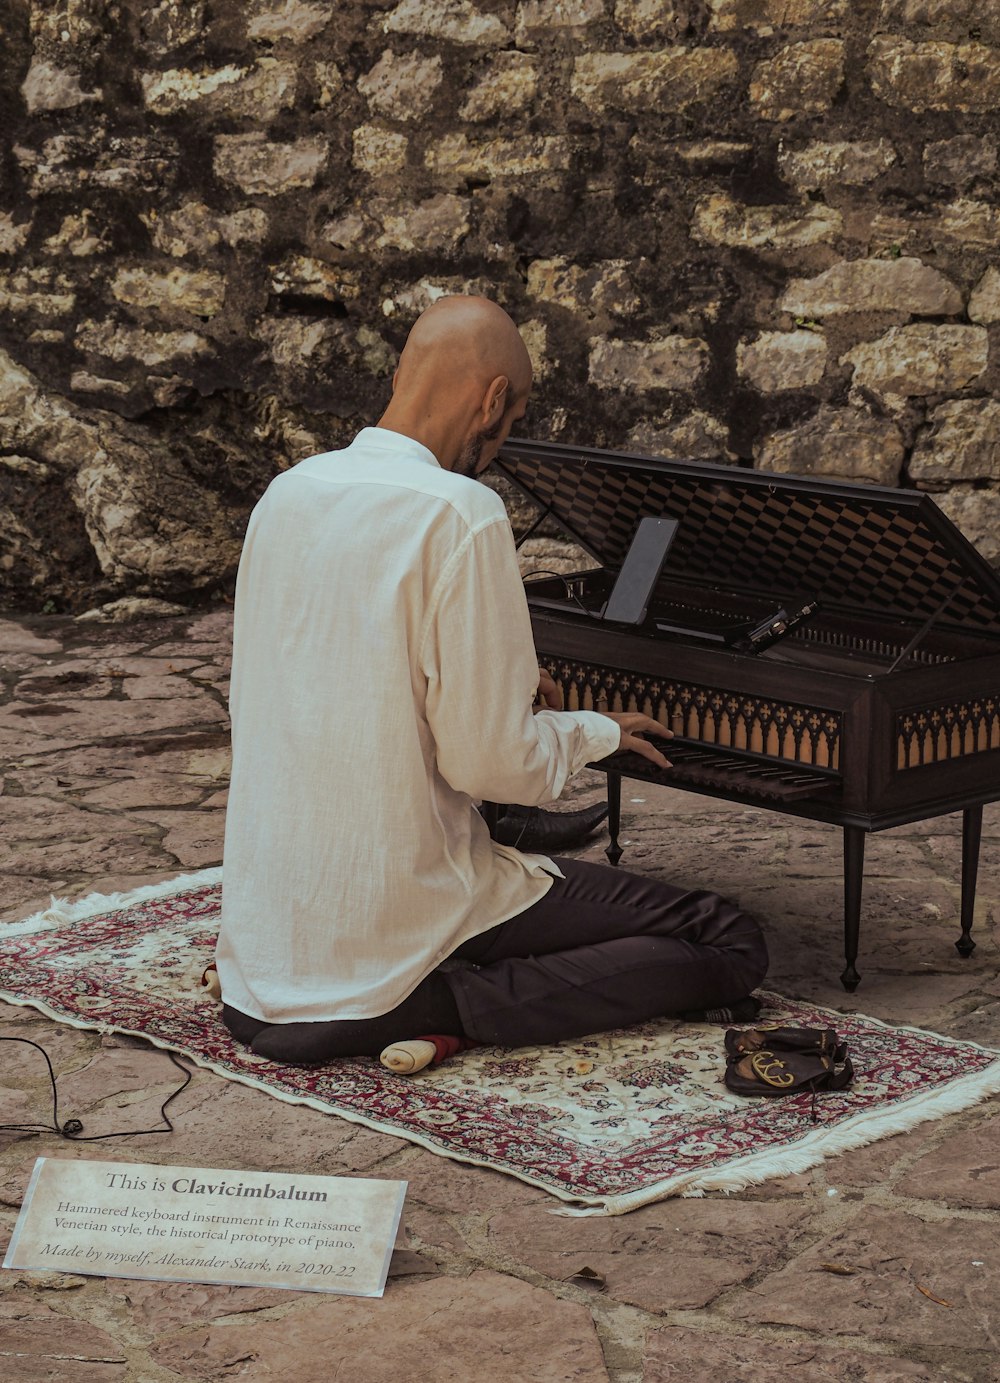 a man sitting on a rug playing a piano